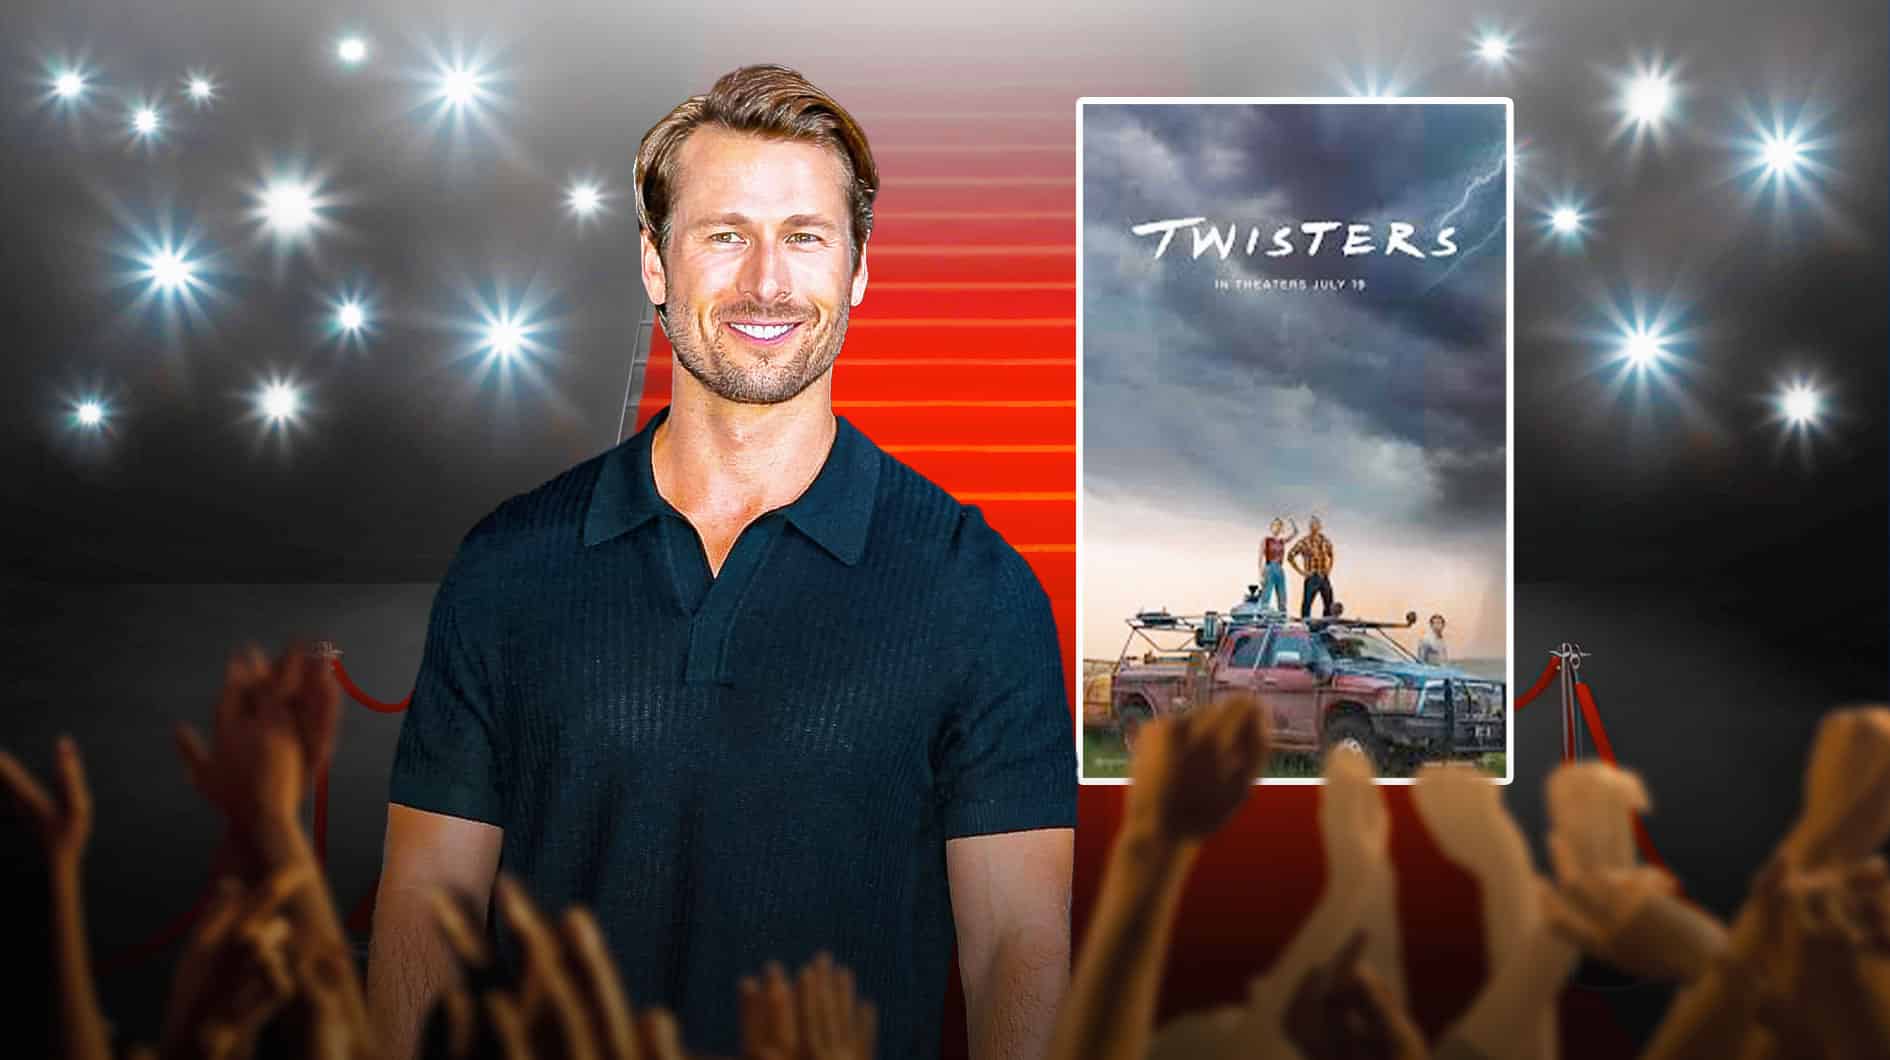 Glen Powell next to Twisters poster and red carpet background.